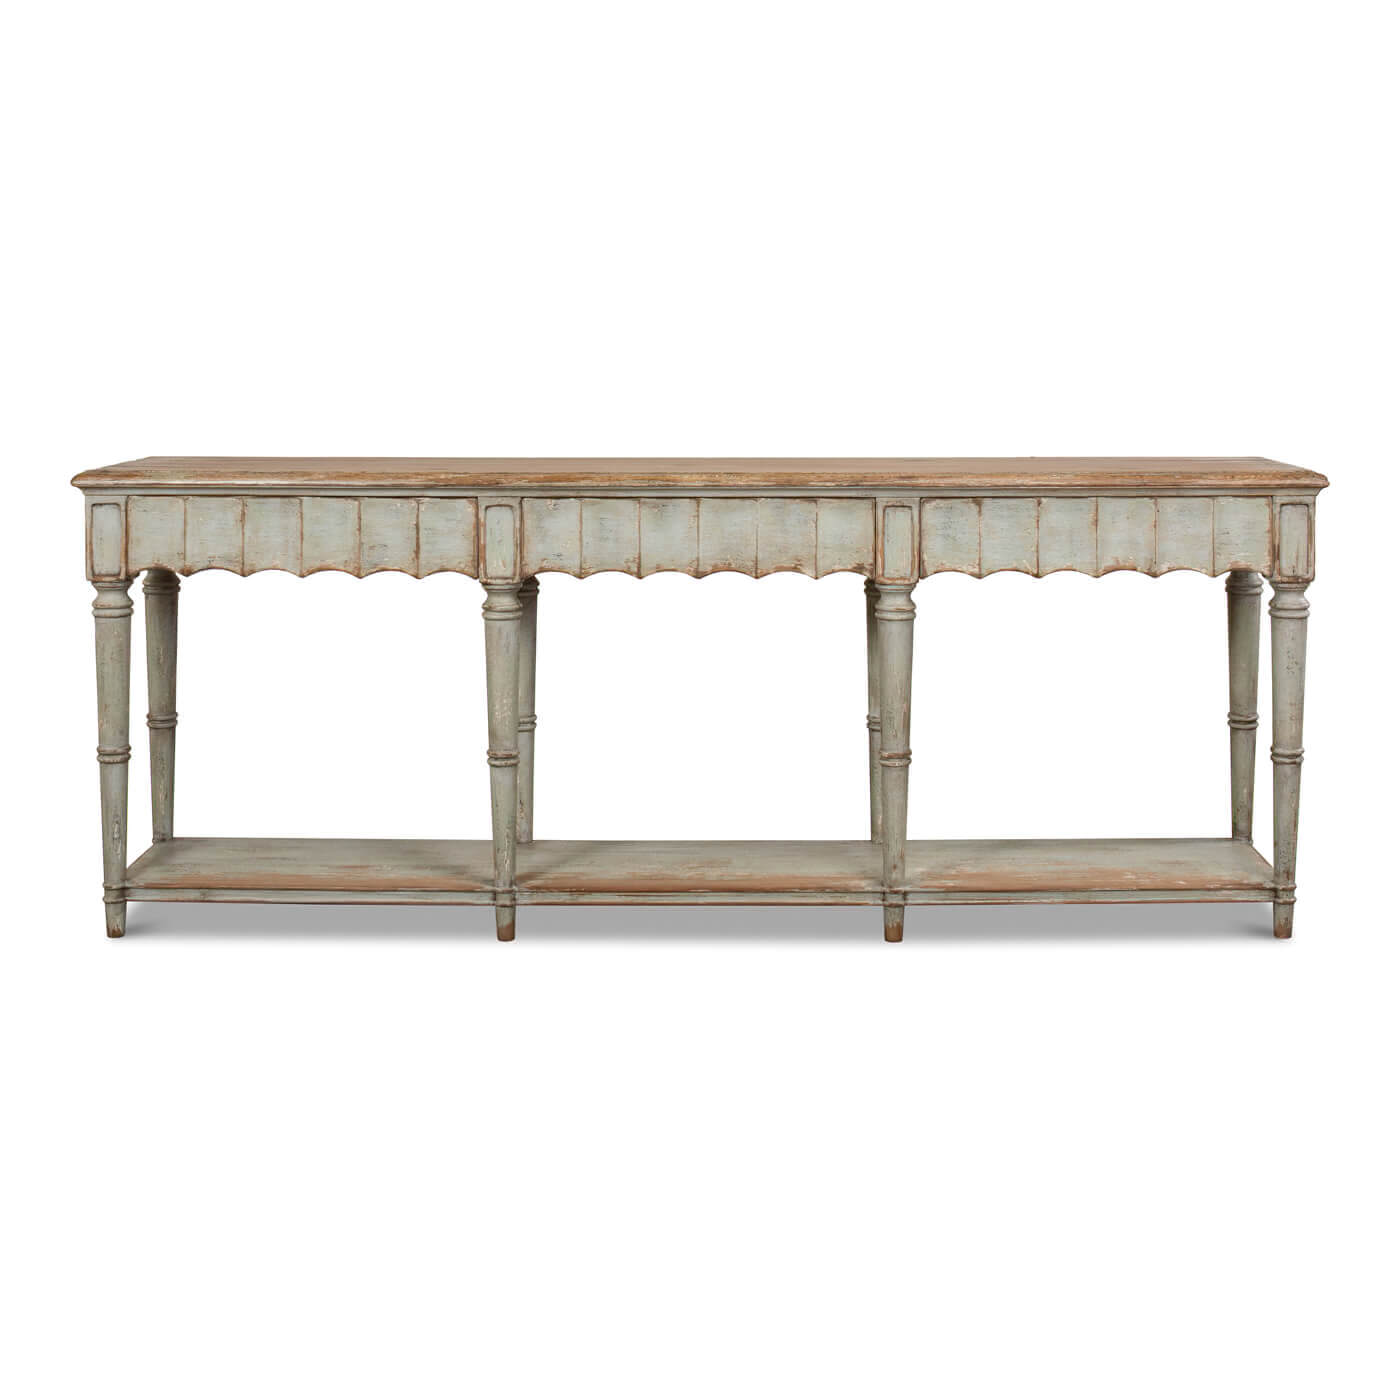 Large French Country Console Table - English Georgian America